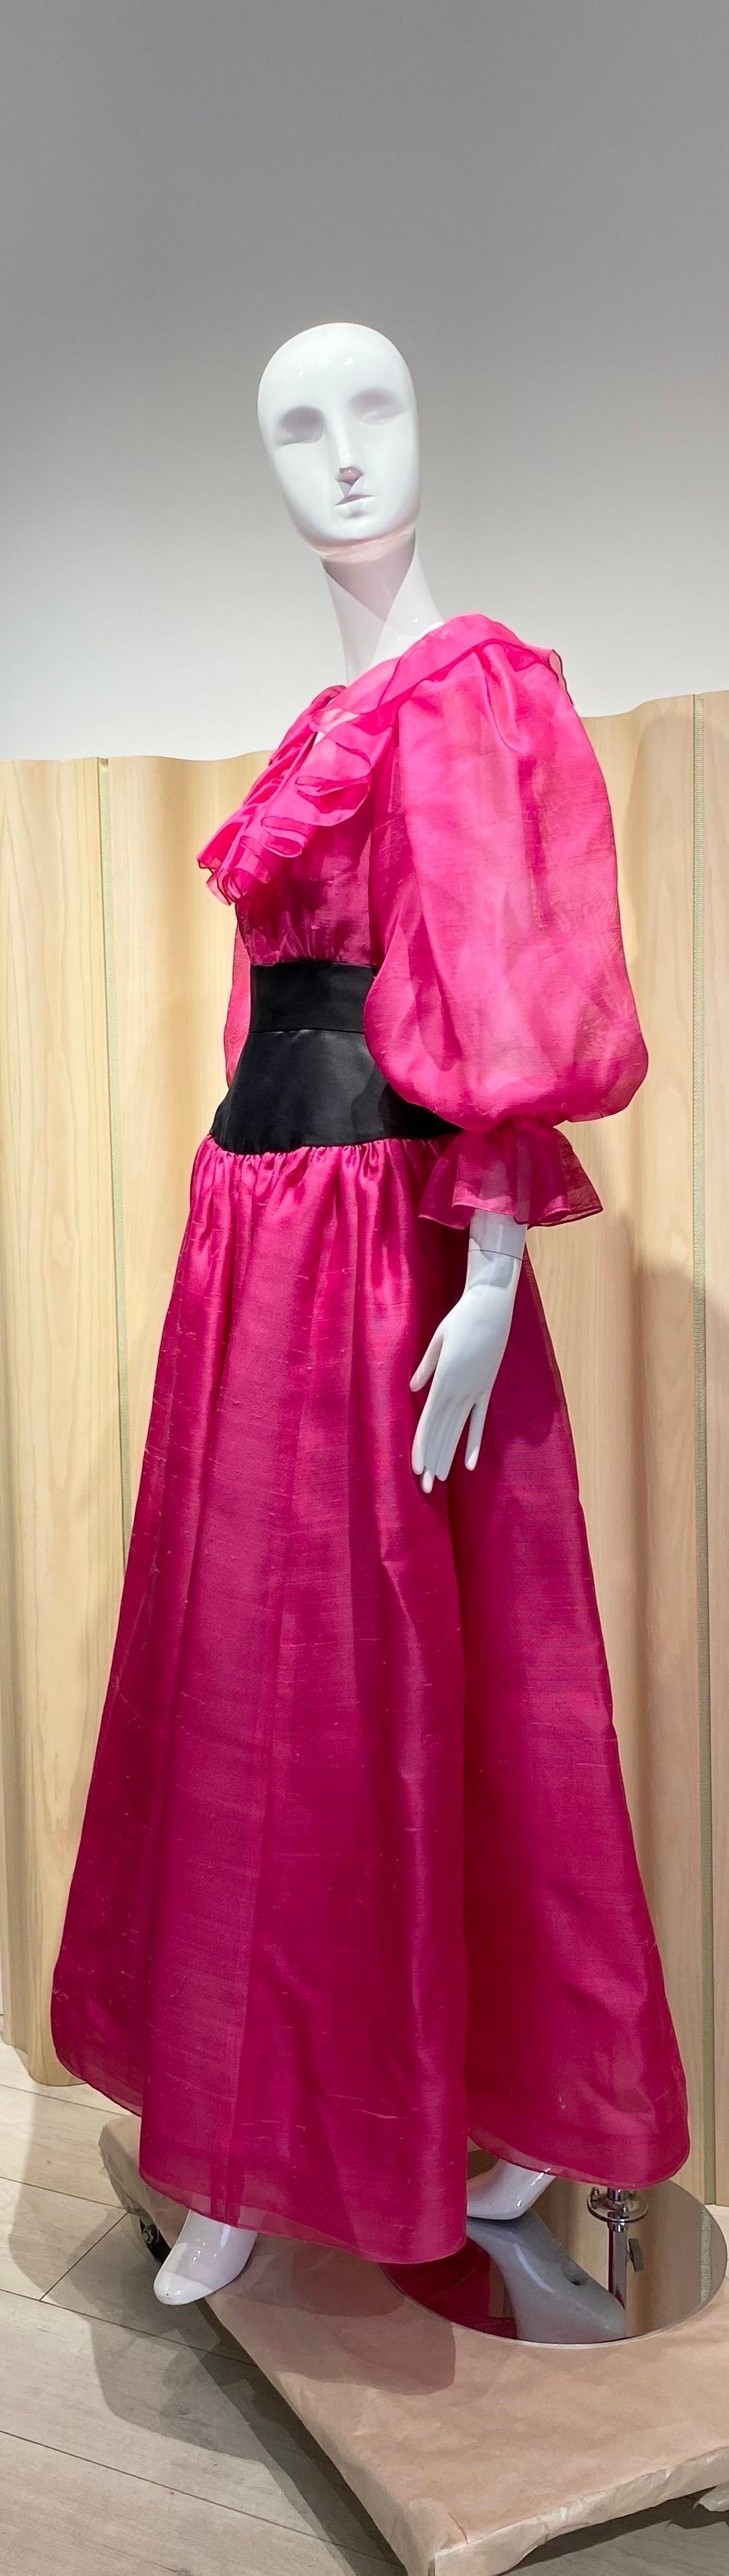 Vintage Oscar De la renta magenta pink silk gown with billowy sleeves and ruffle collar. Perfect for cocktail party or Black tie event.
Bust 34”
Waist: 27”